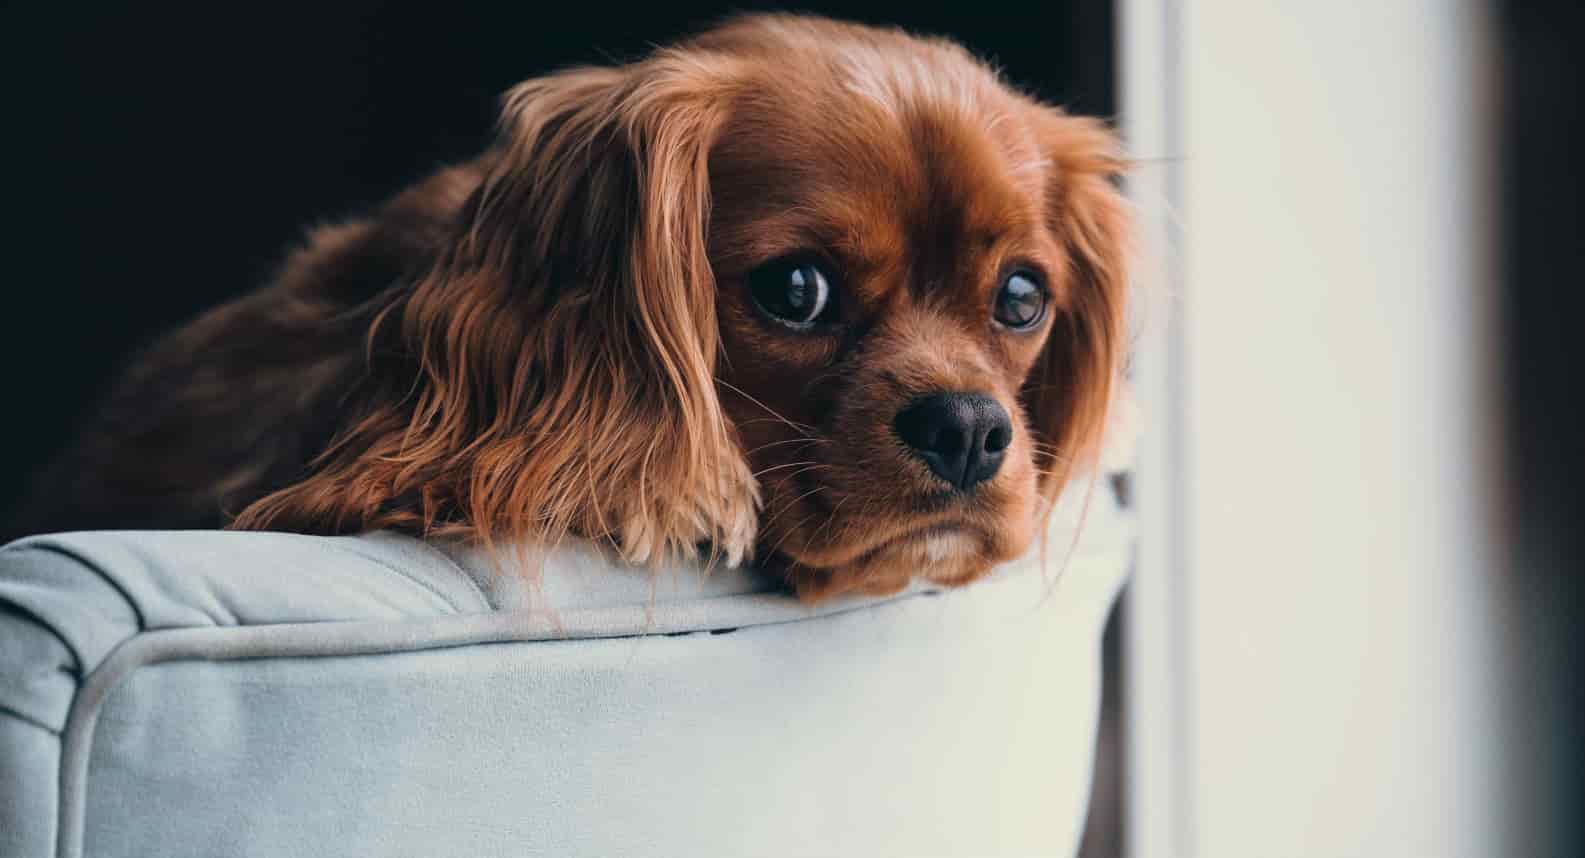 What can I give my dog for anxiety?